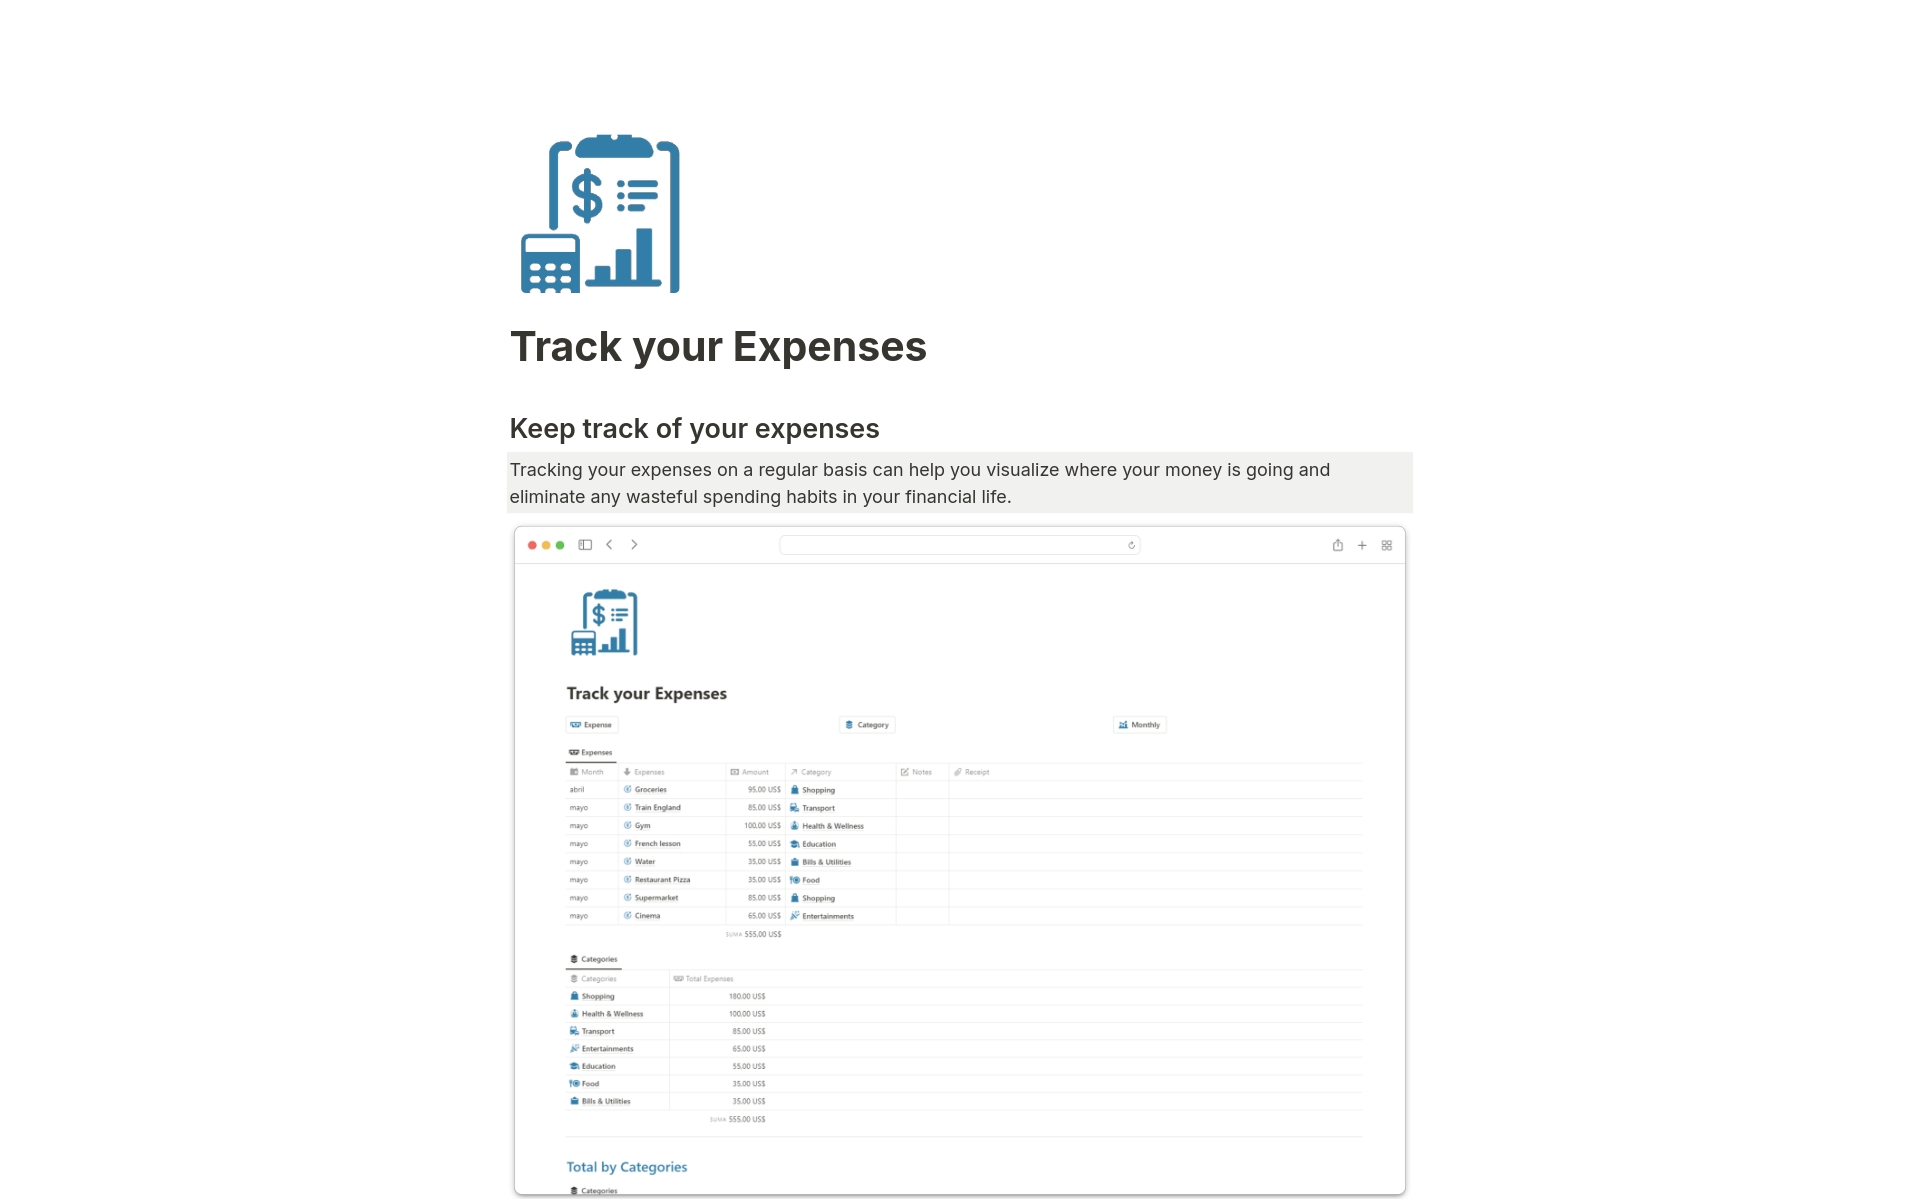 Using Track you Expenses template, you can easily track your daily expenses and clearly understand your monthly totals.
Tracking your expenses regularly can help you visualize where your money is going and eliminate any wasteful spending habits in your financial life.